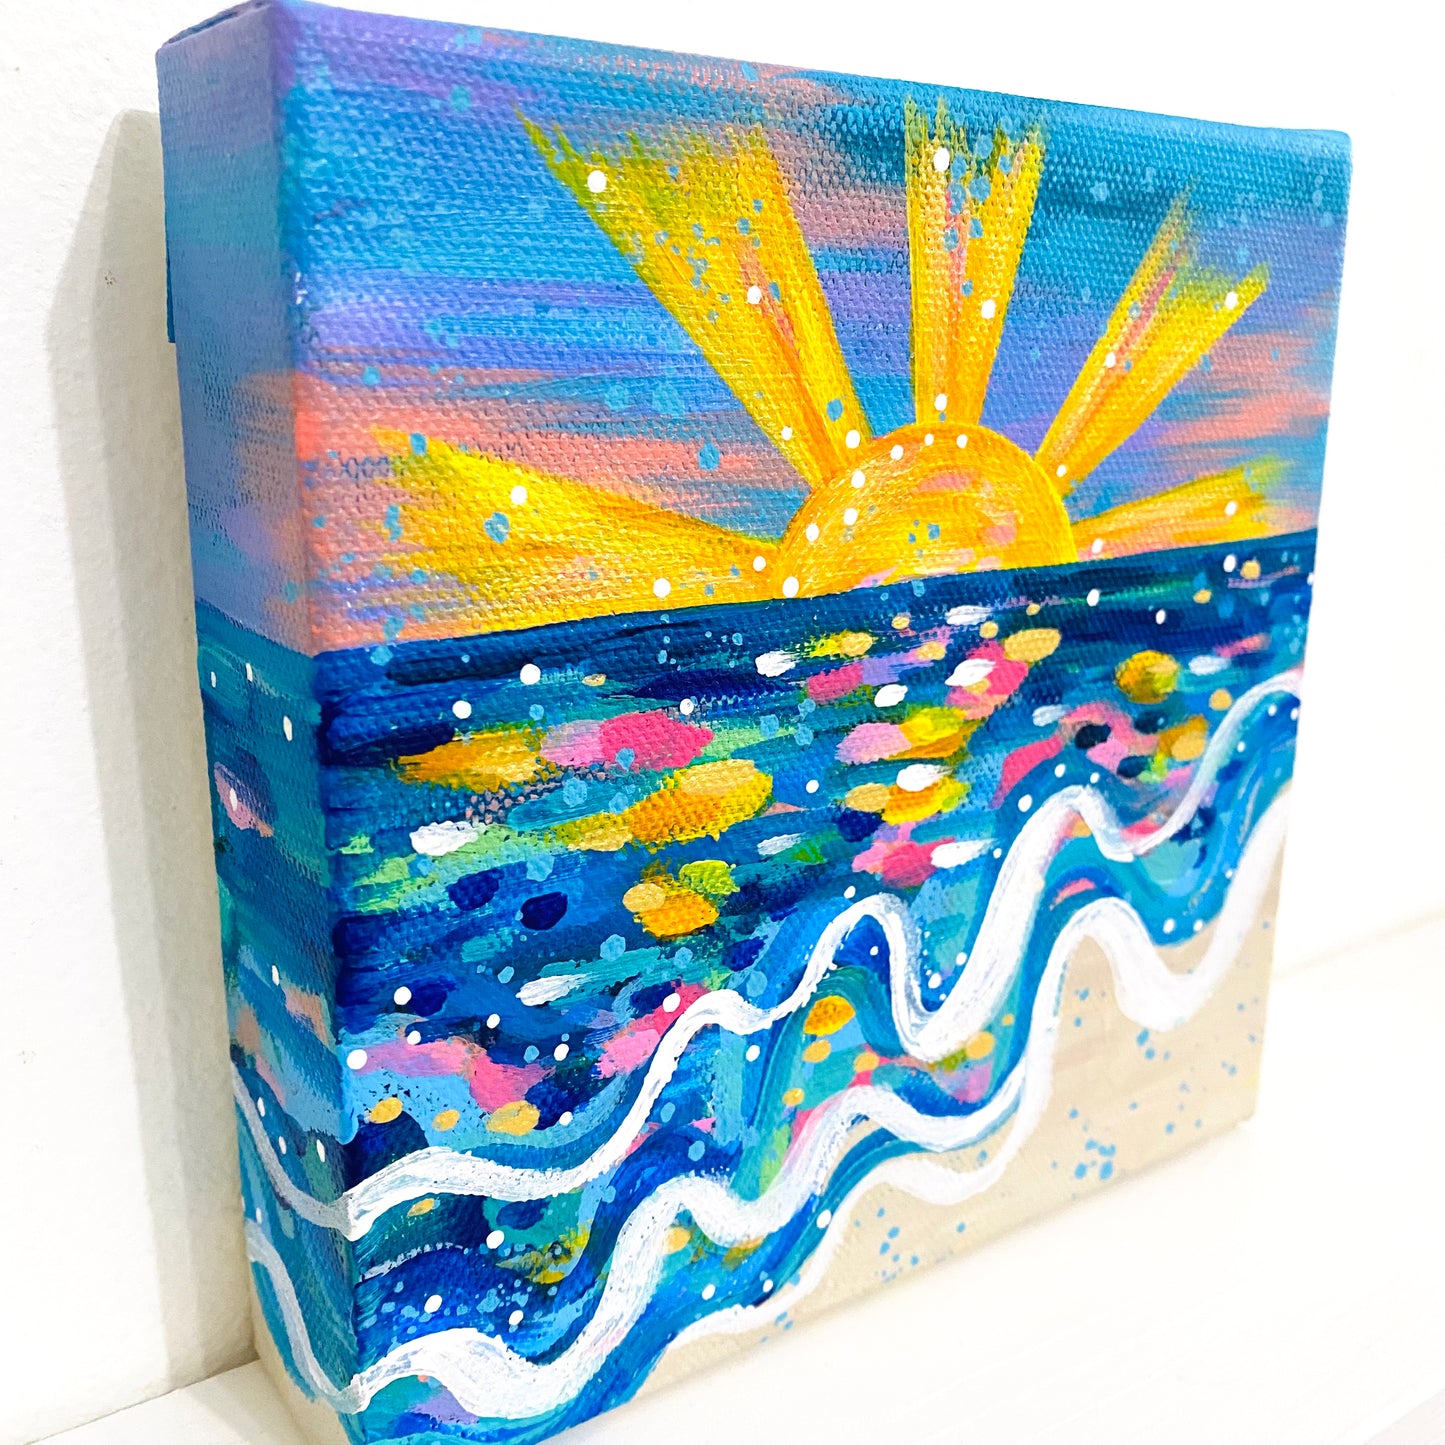 "Paradise" 6x6 inch Original Coastal Inspired Painting on Canvas with painted sides